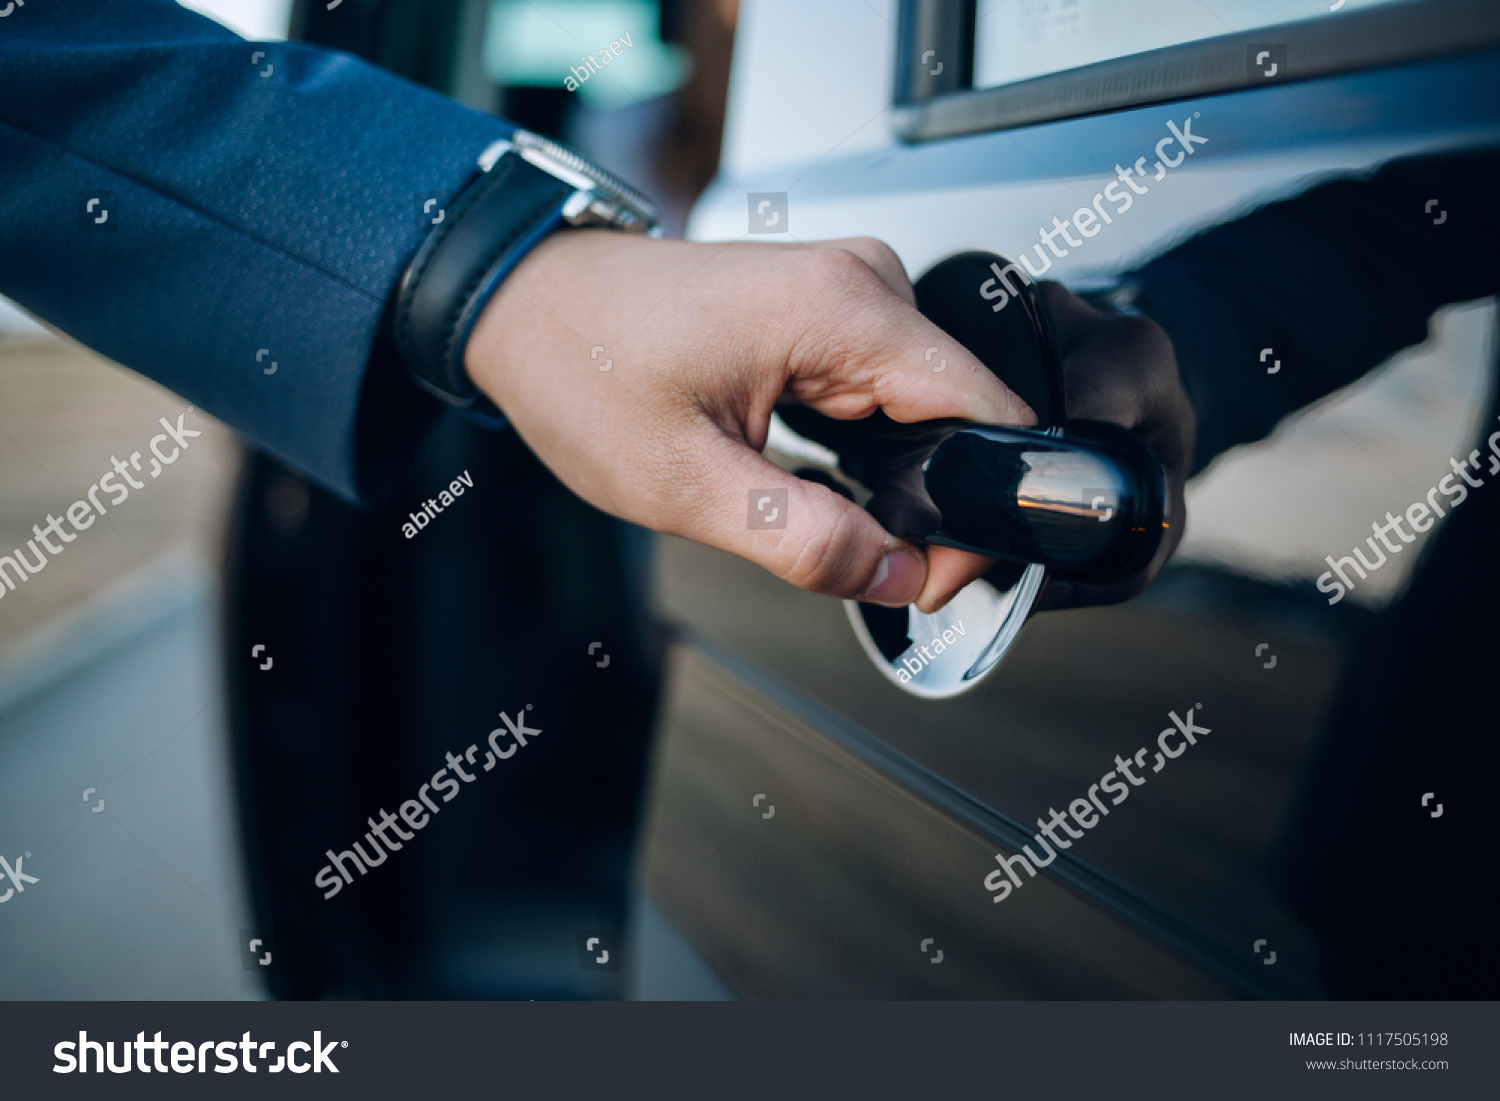 Close-Up Shot of a Professional Businessman with his Hand Firmly on the Car Door Handle, Demonstrating Elegance and Confidence while Opening the Door to his Vehicle #1117505198